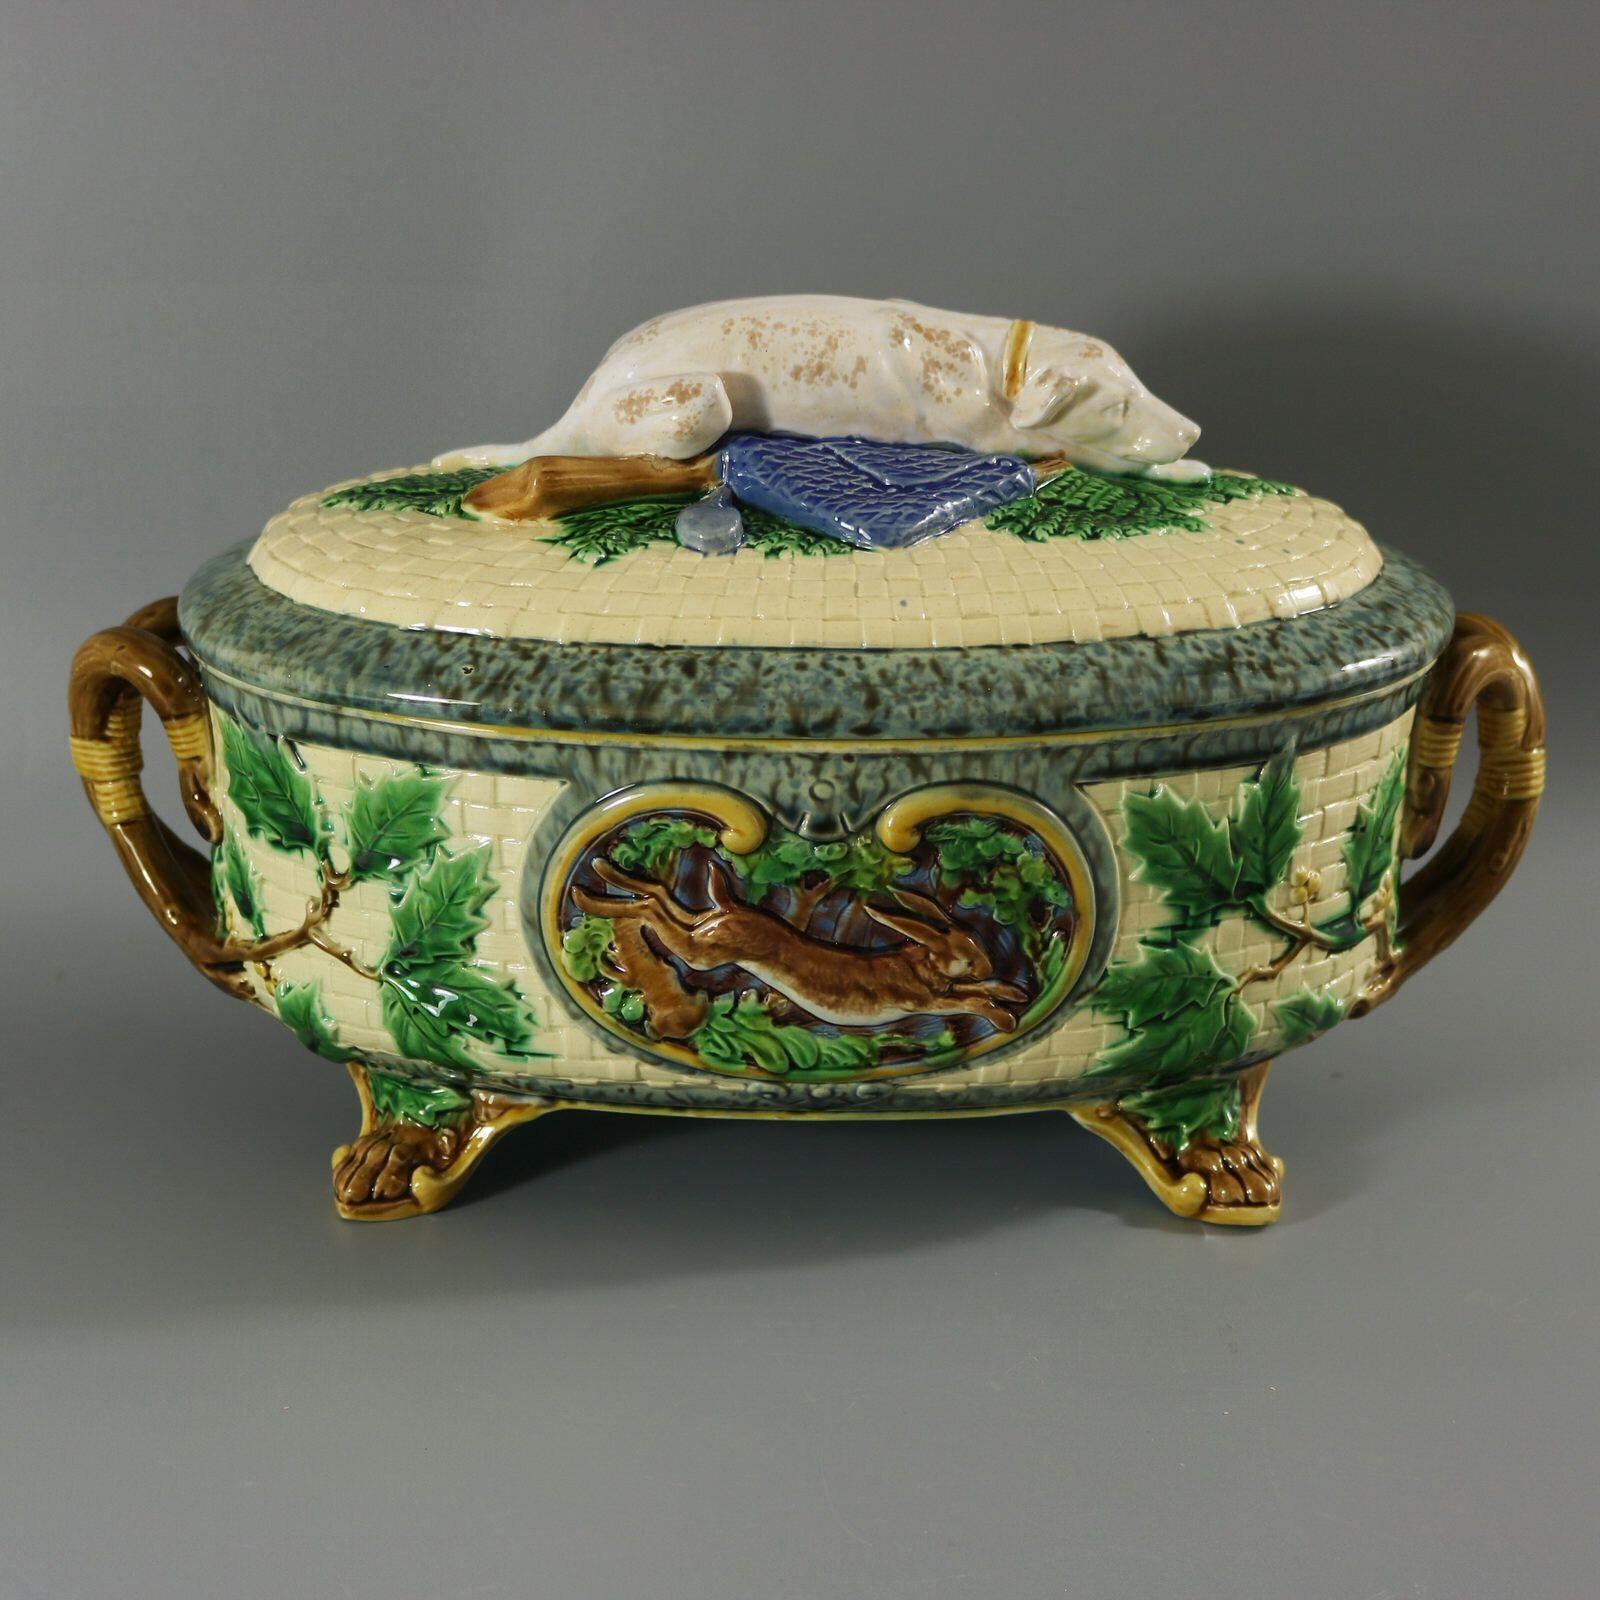 Minton Majolica game pie dish with liner which features a hunting dog asleep next to a gun, a powder flask and a game bag. Colouration: cream, green, brown, are predominant. The piece bears maker's marks for the Minton pottery. Bears a pattern